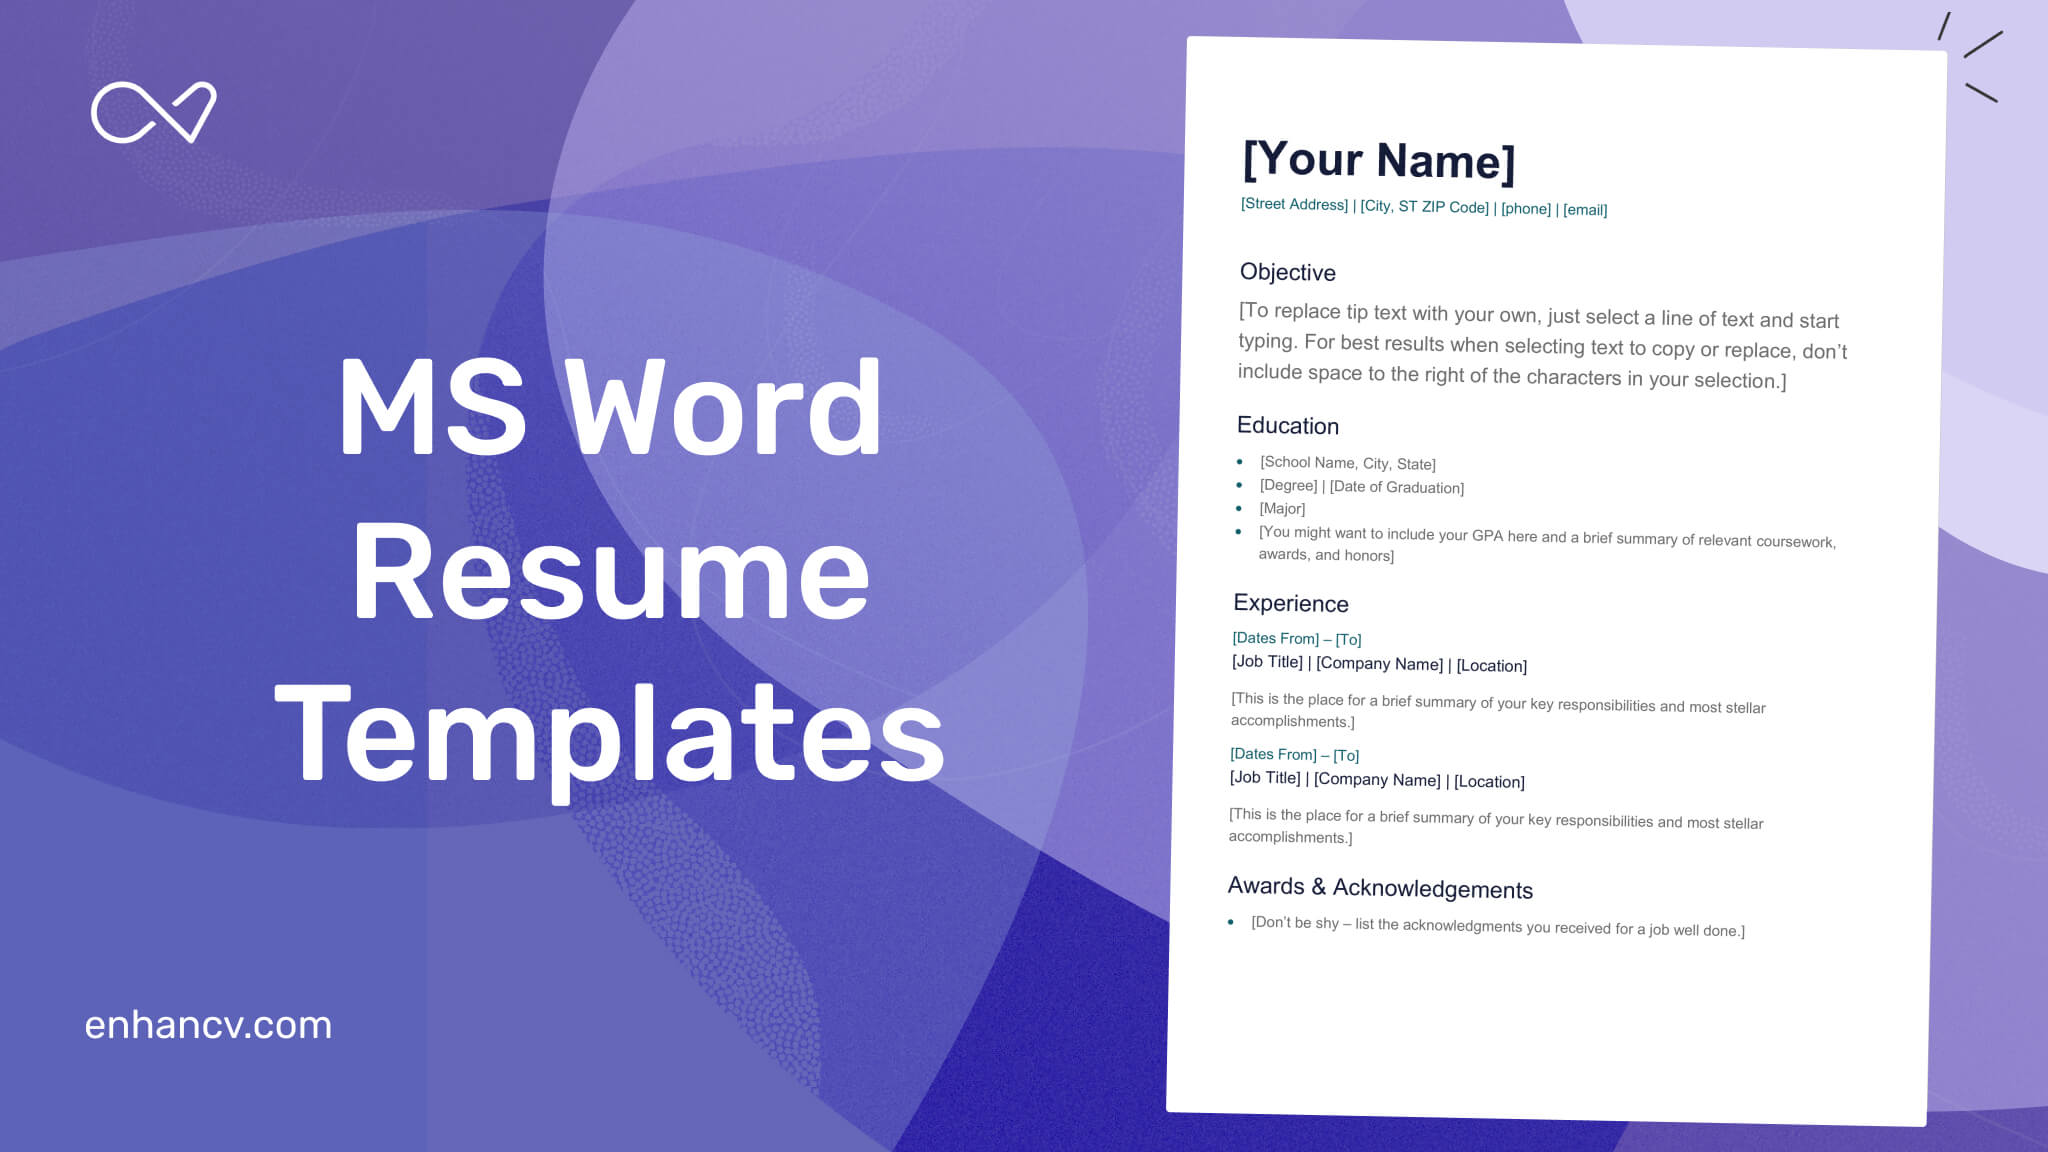 resume: An Incredibly Easy Method That Works For All